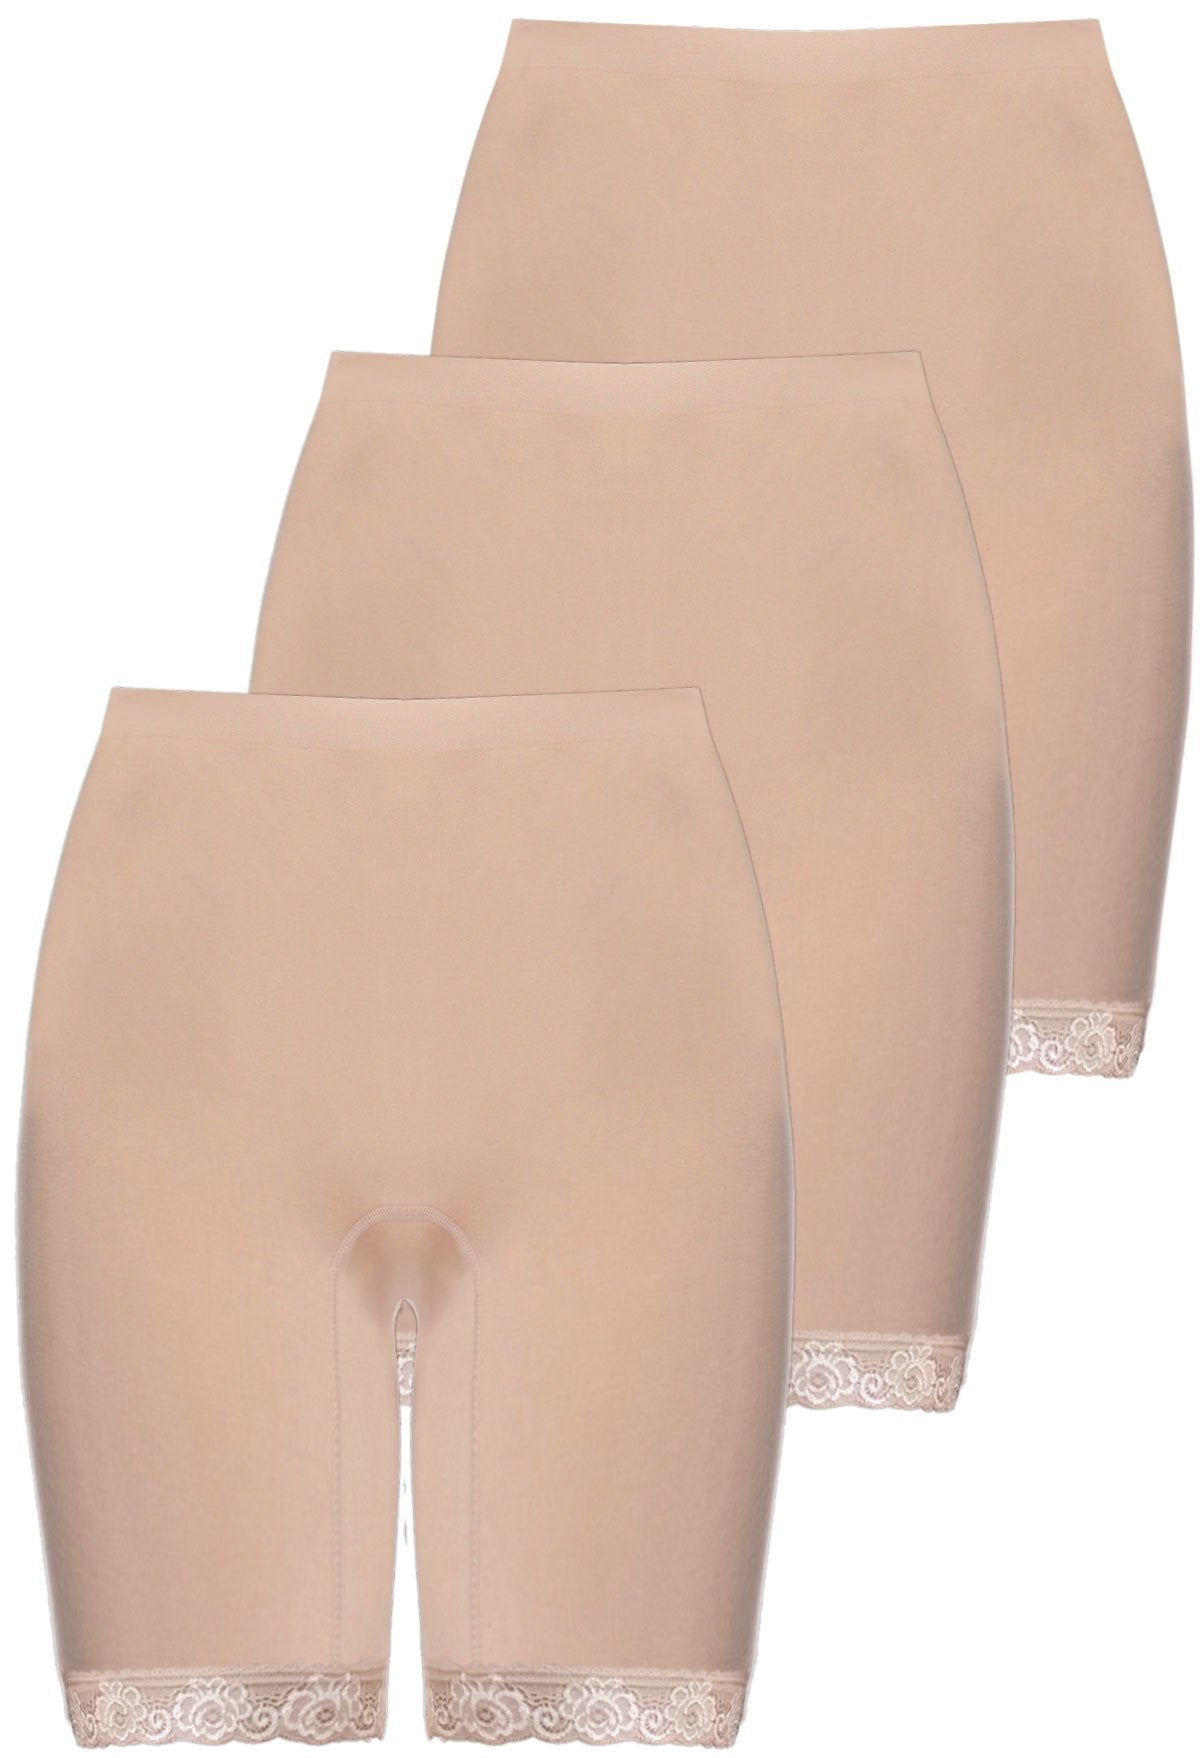 Ladies Cover-up Anti Chafing Shorts for Under Skirts & Dress SM To